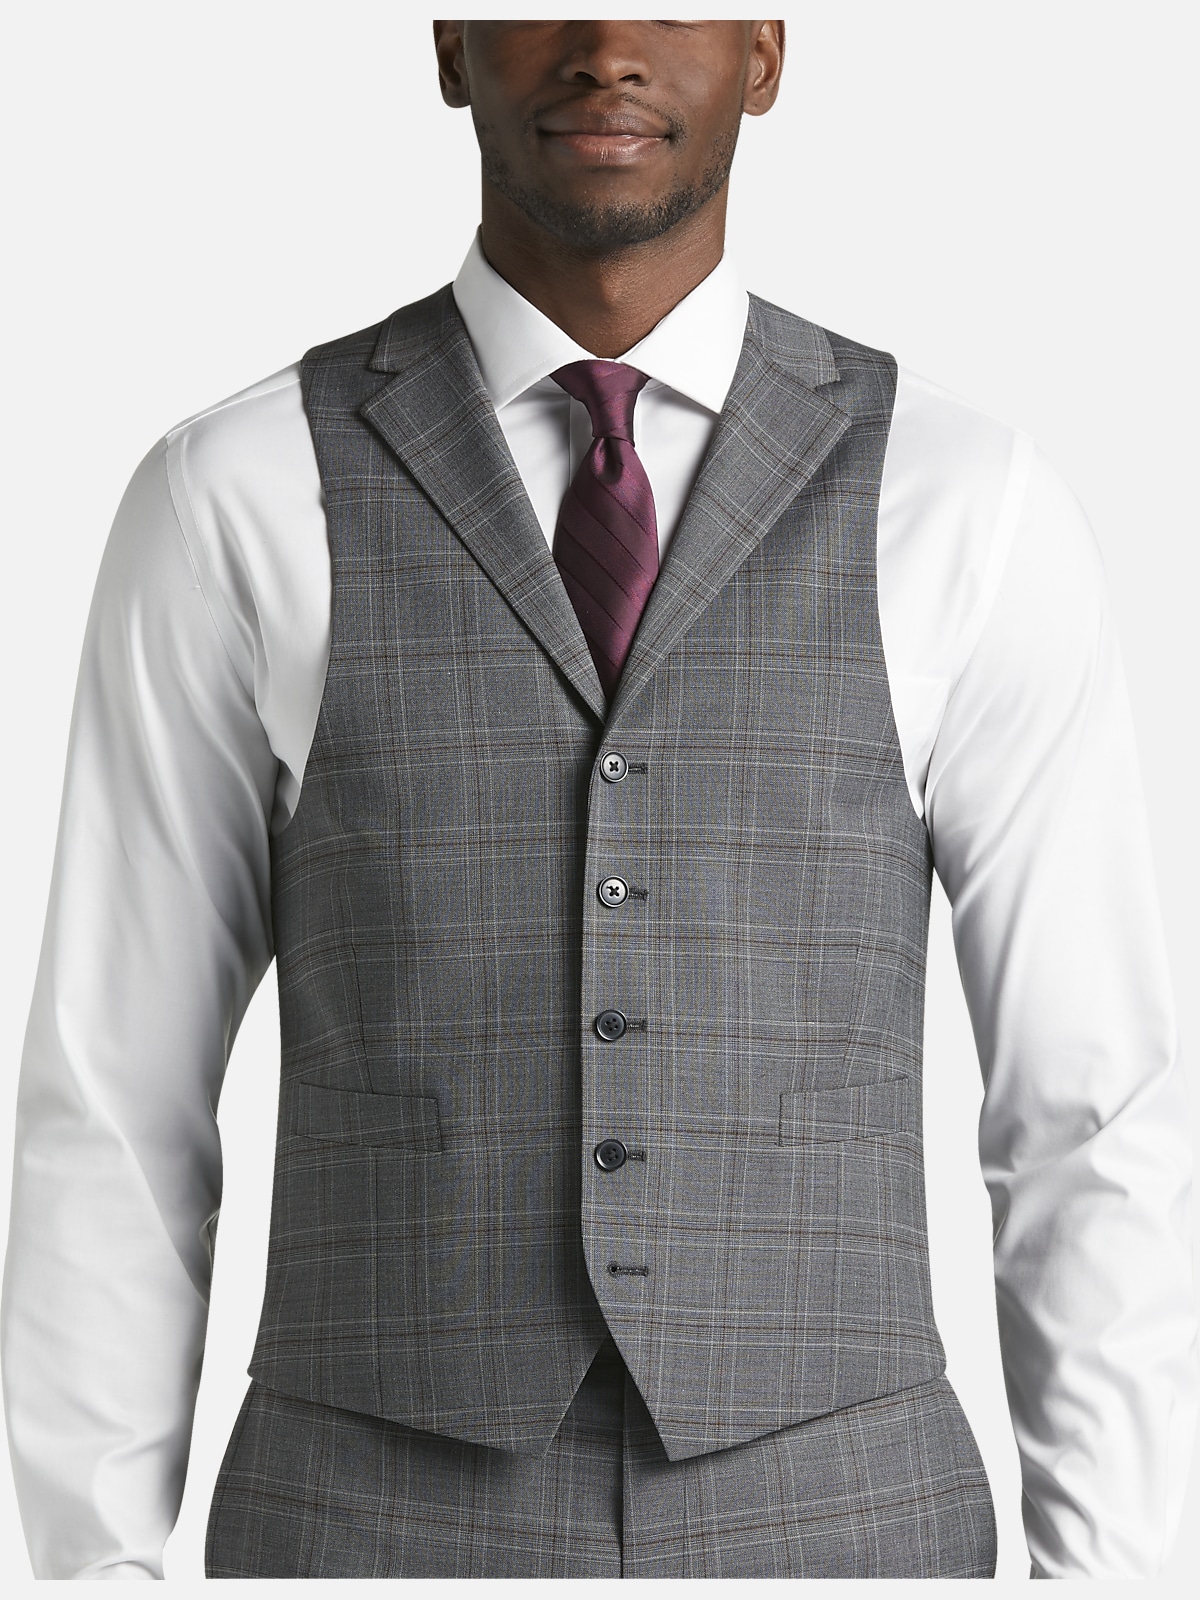 Michael Strahan Classic Fit Suit Separates Vest All Clothing Mens Wearhouse 